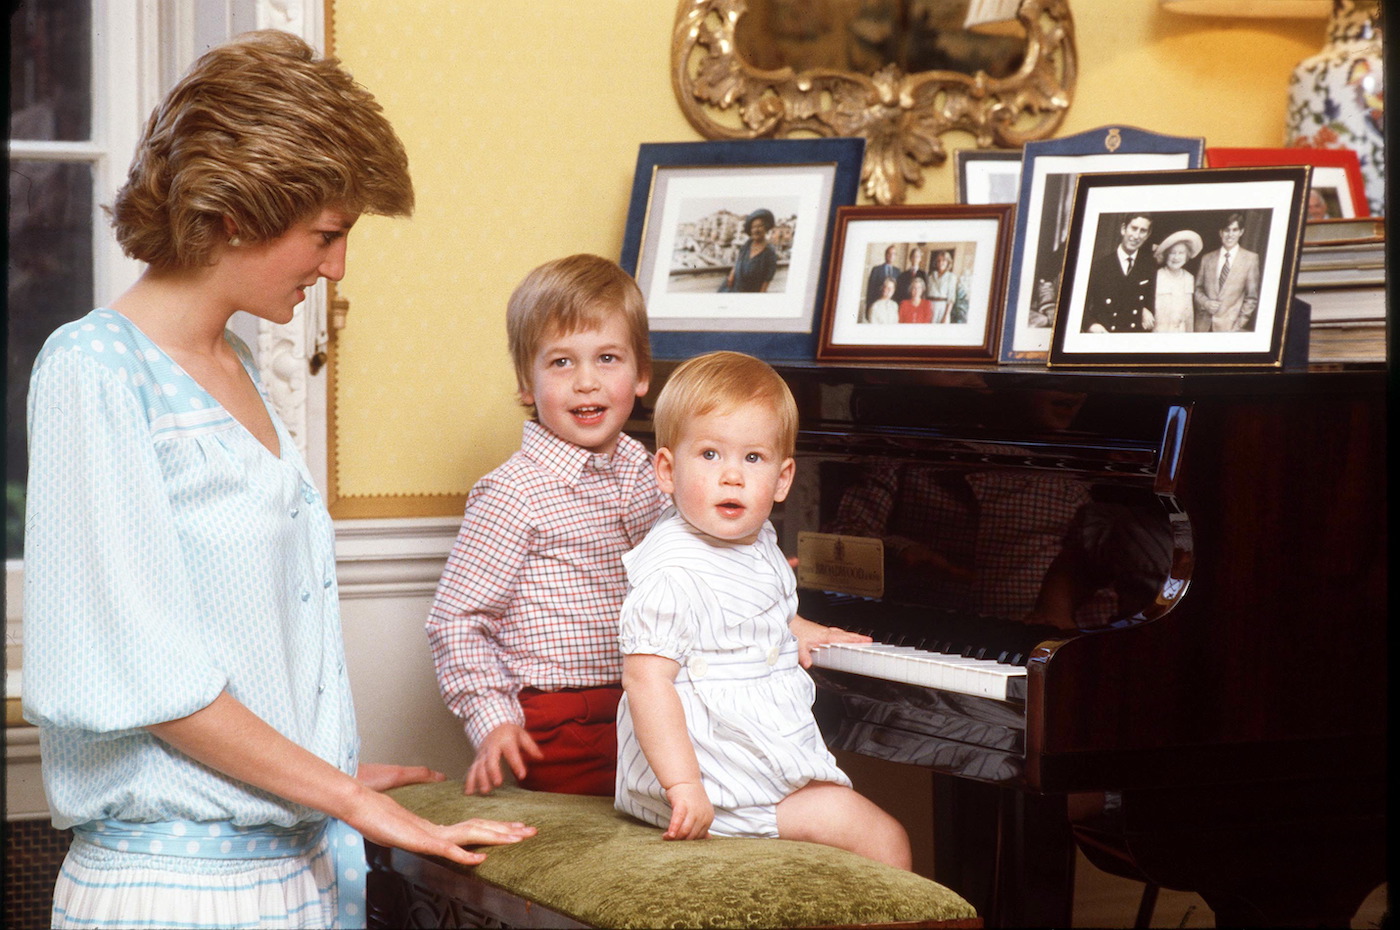 Princess Diana is nearby while Prince William and Prince Harry sit on a piano stool